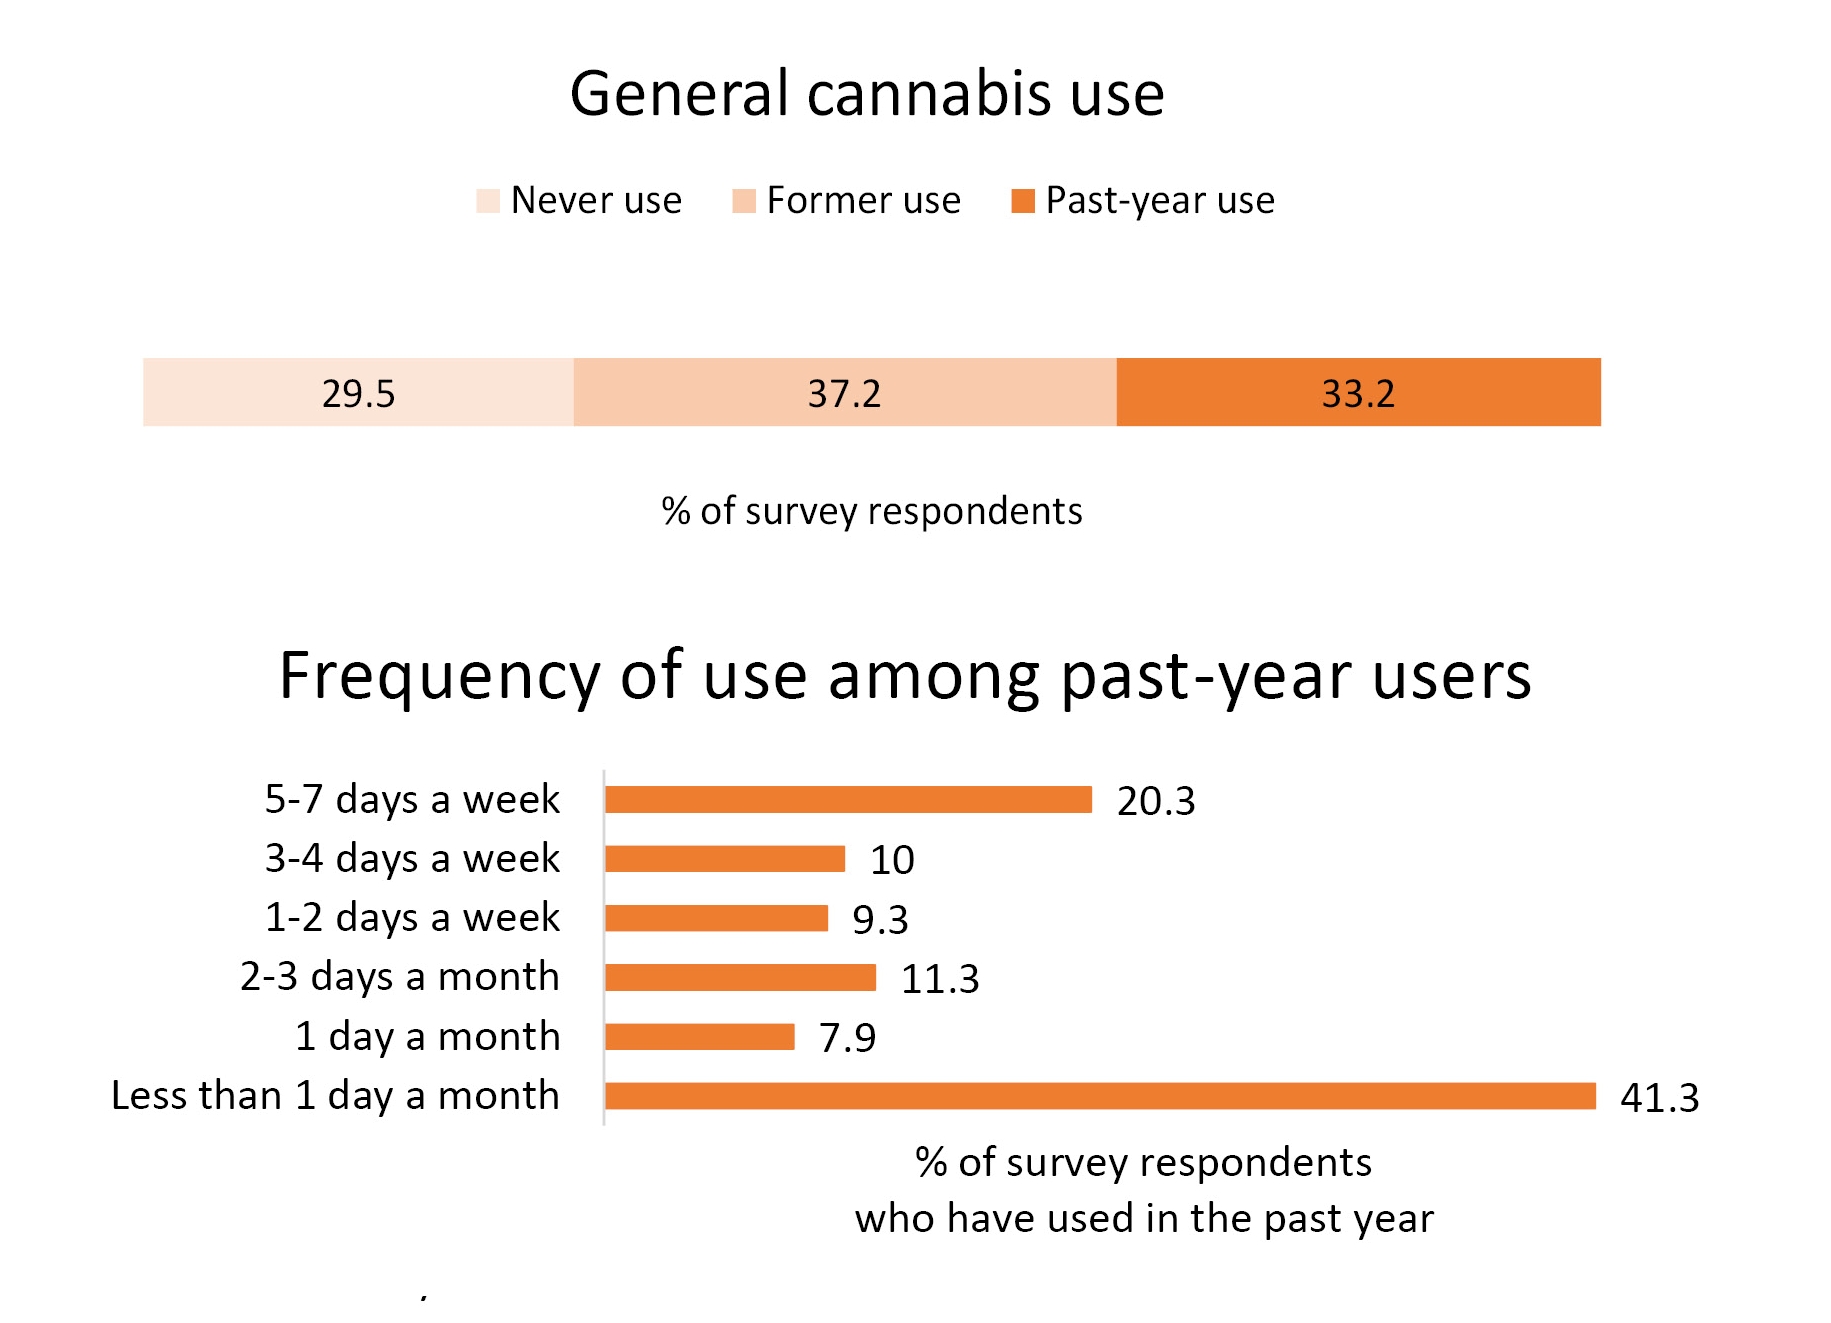 Two graphs. The first graph is on general cannabis use. It shows about one third of survey respondents used cannabis in the past year, a third reported former use, and a third never used. The second graph is on the frequency of use among past-year users. Its shows the largest share of respondents who have used in the past year, 41.3 per cent, used less than one day a month. But the second largest portion, 20.3 per cent, used five to seven days a week. 